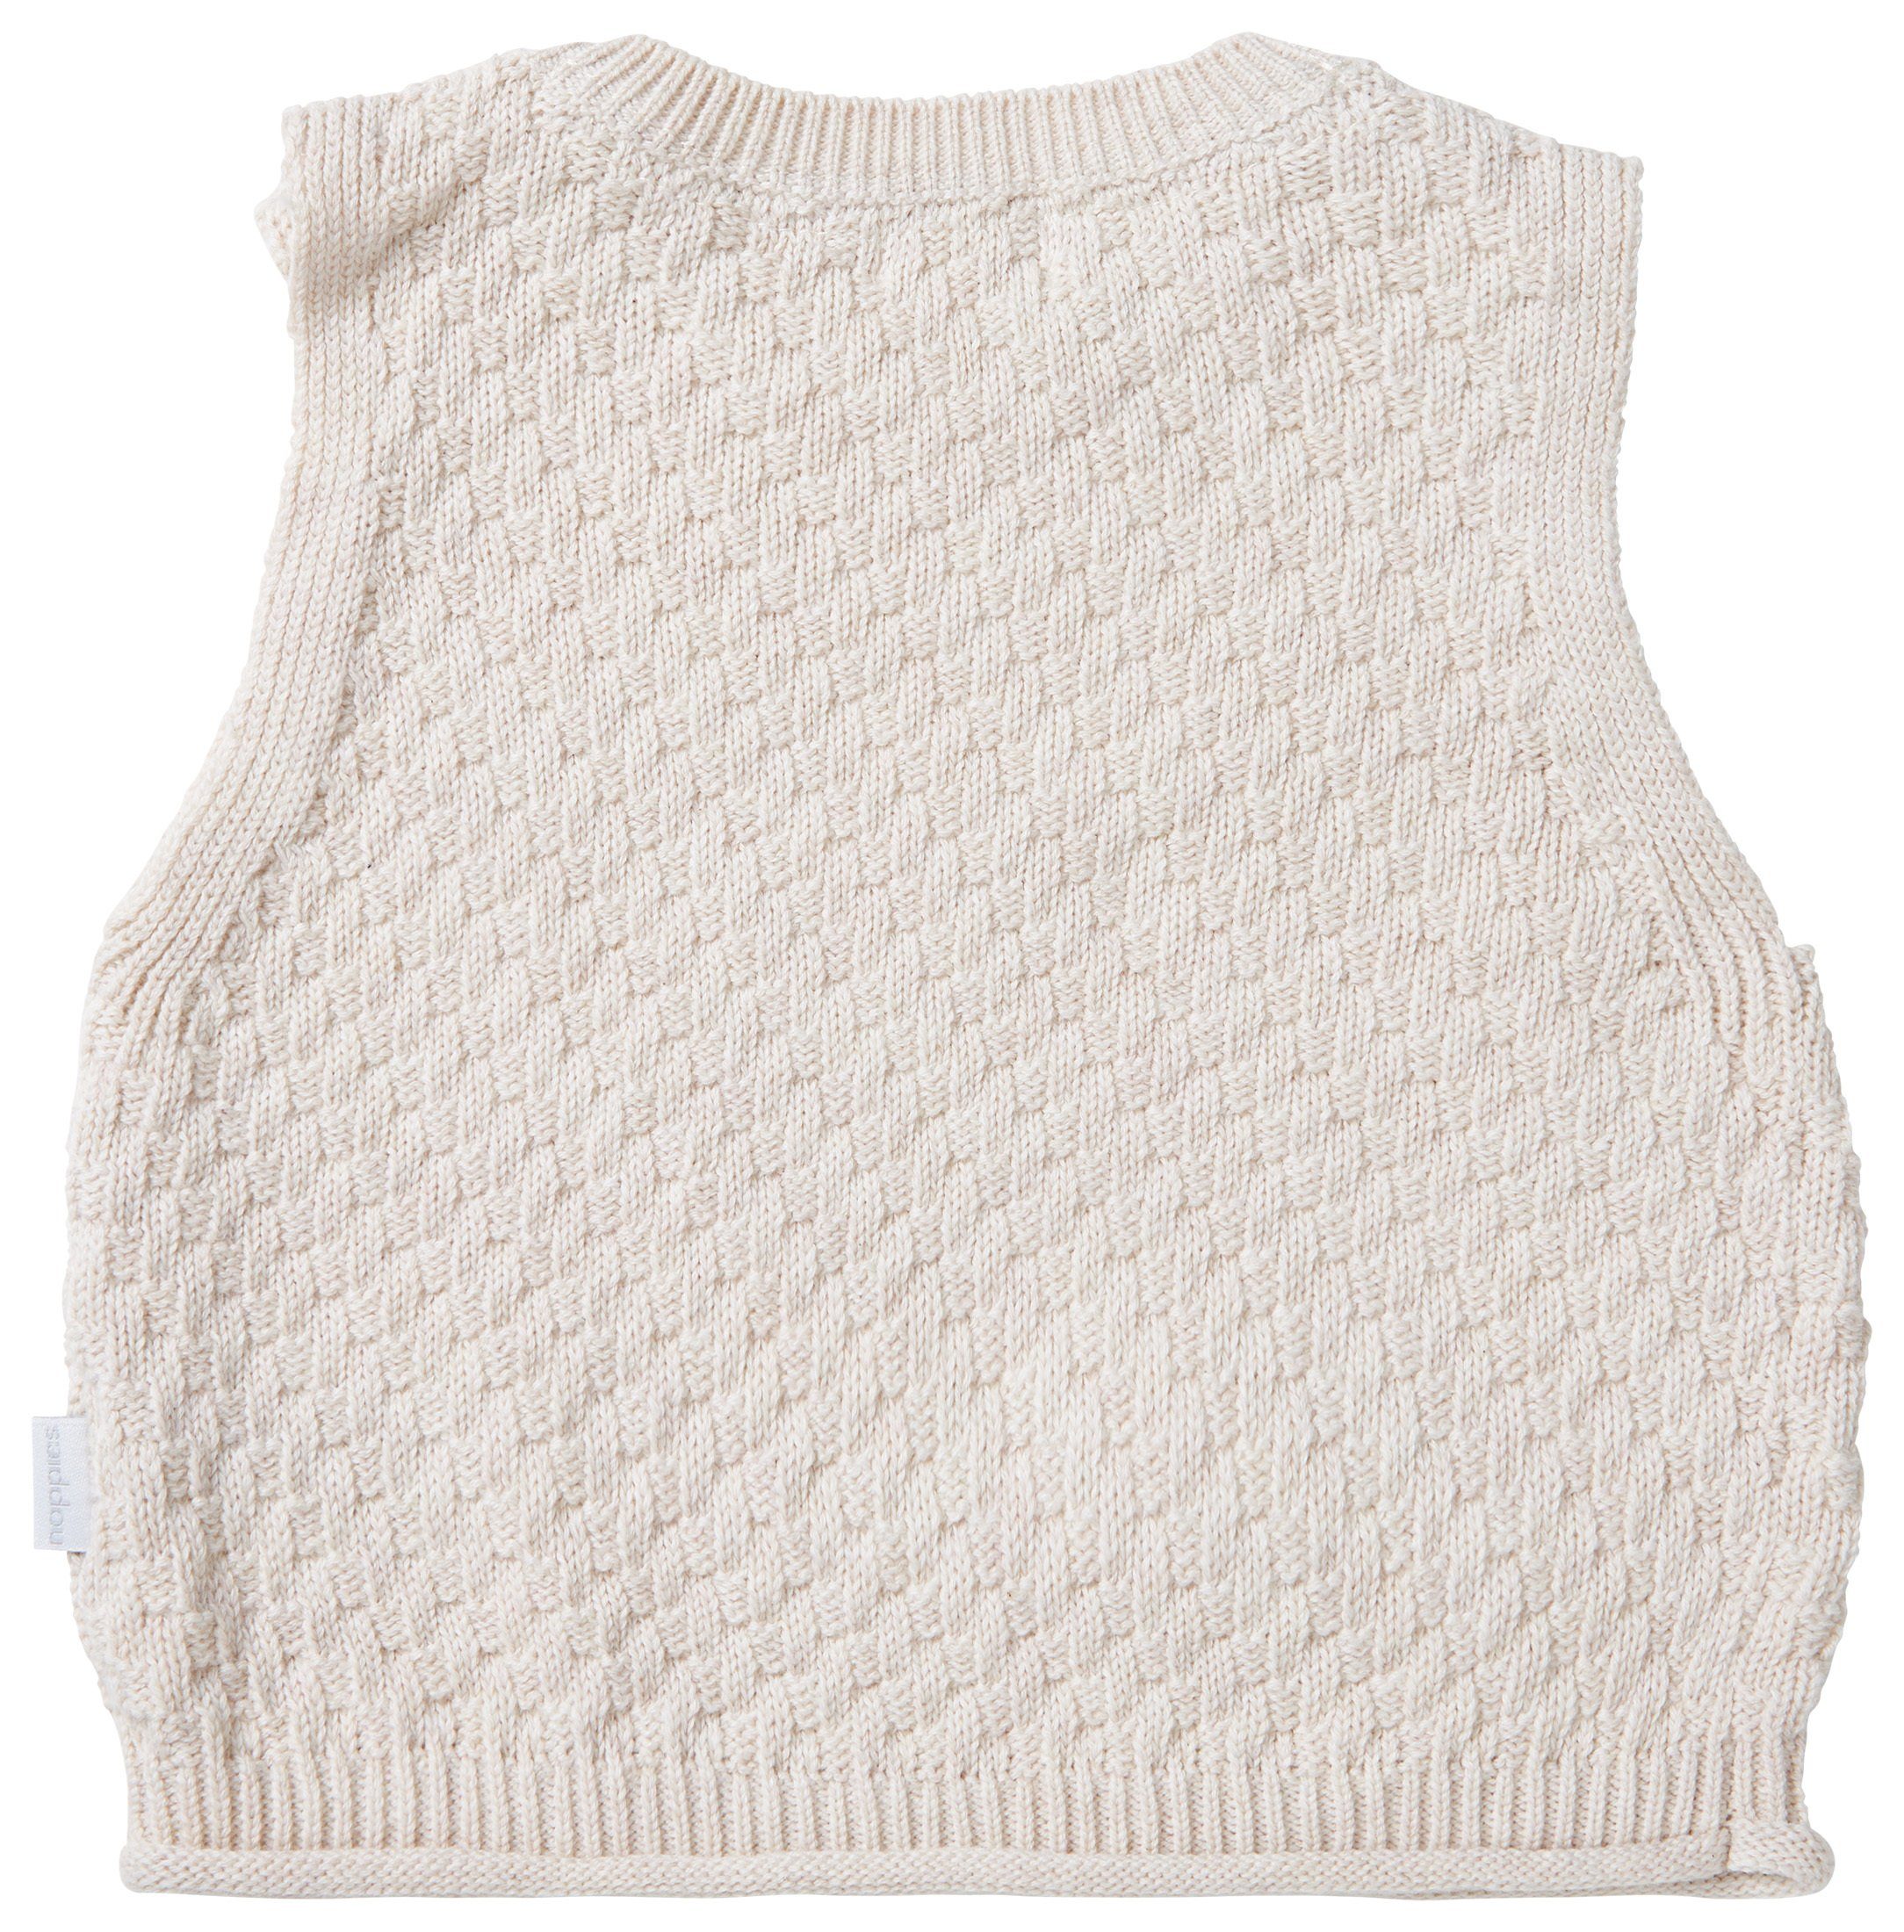 Sweater Terrell Pullover Noppies (1-tlg) Noppies